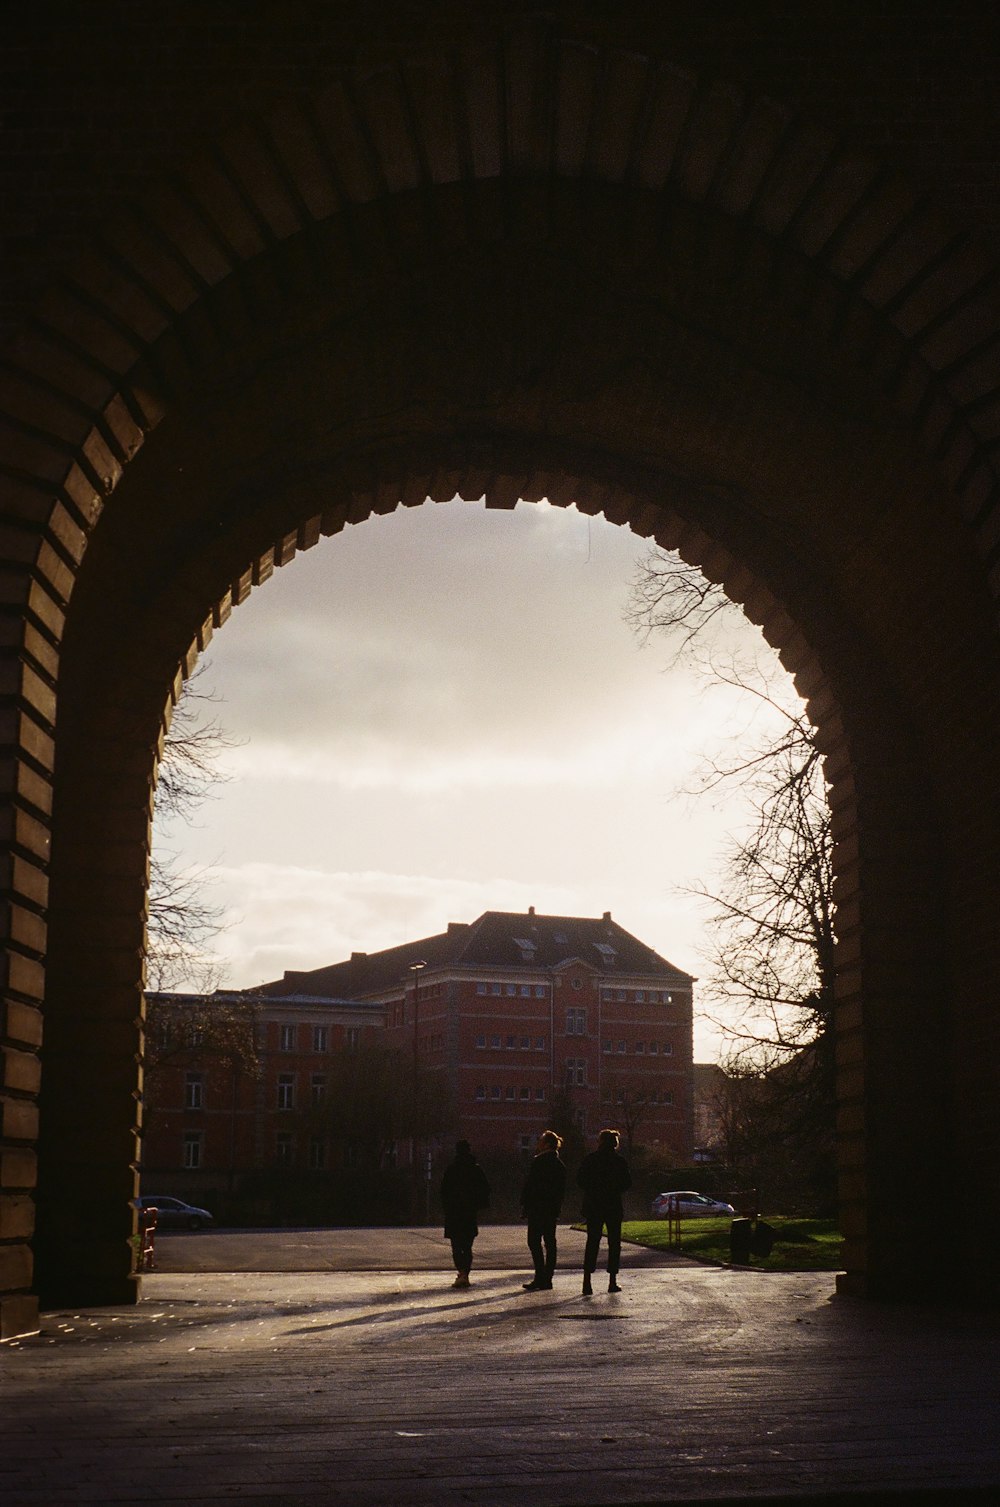 a group of people walking under a large arched archway